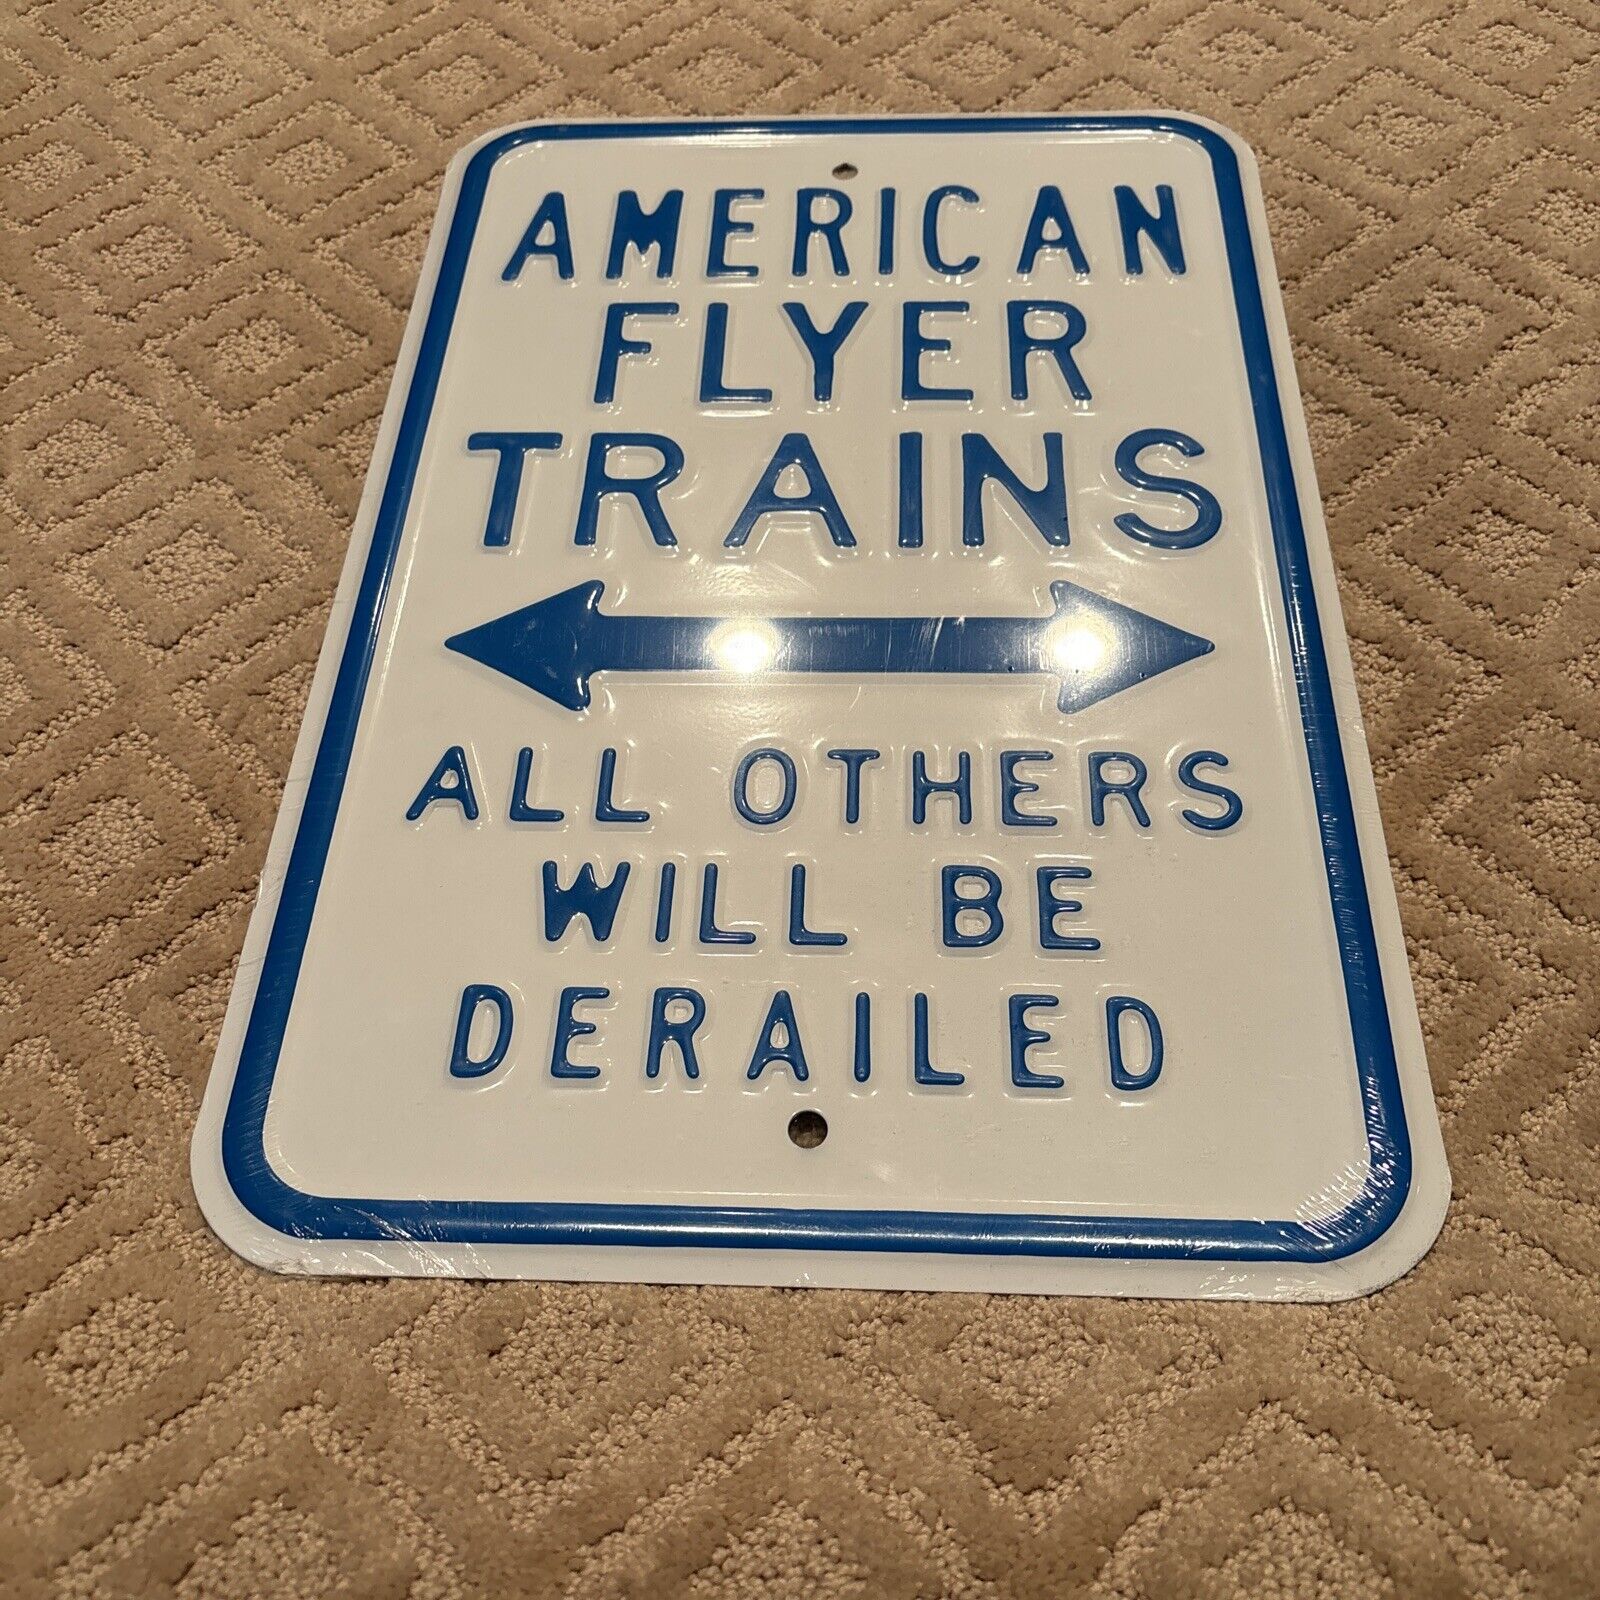 AMERICAN FLYER TRAINS All Others With Be Derailed RAILROAD SIGN